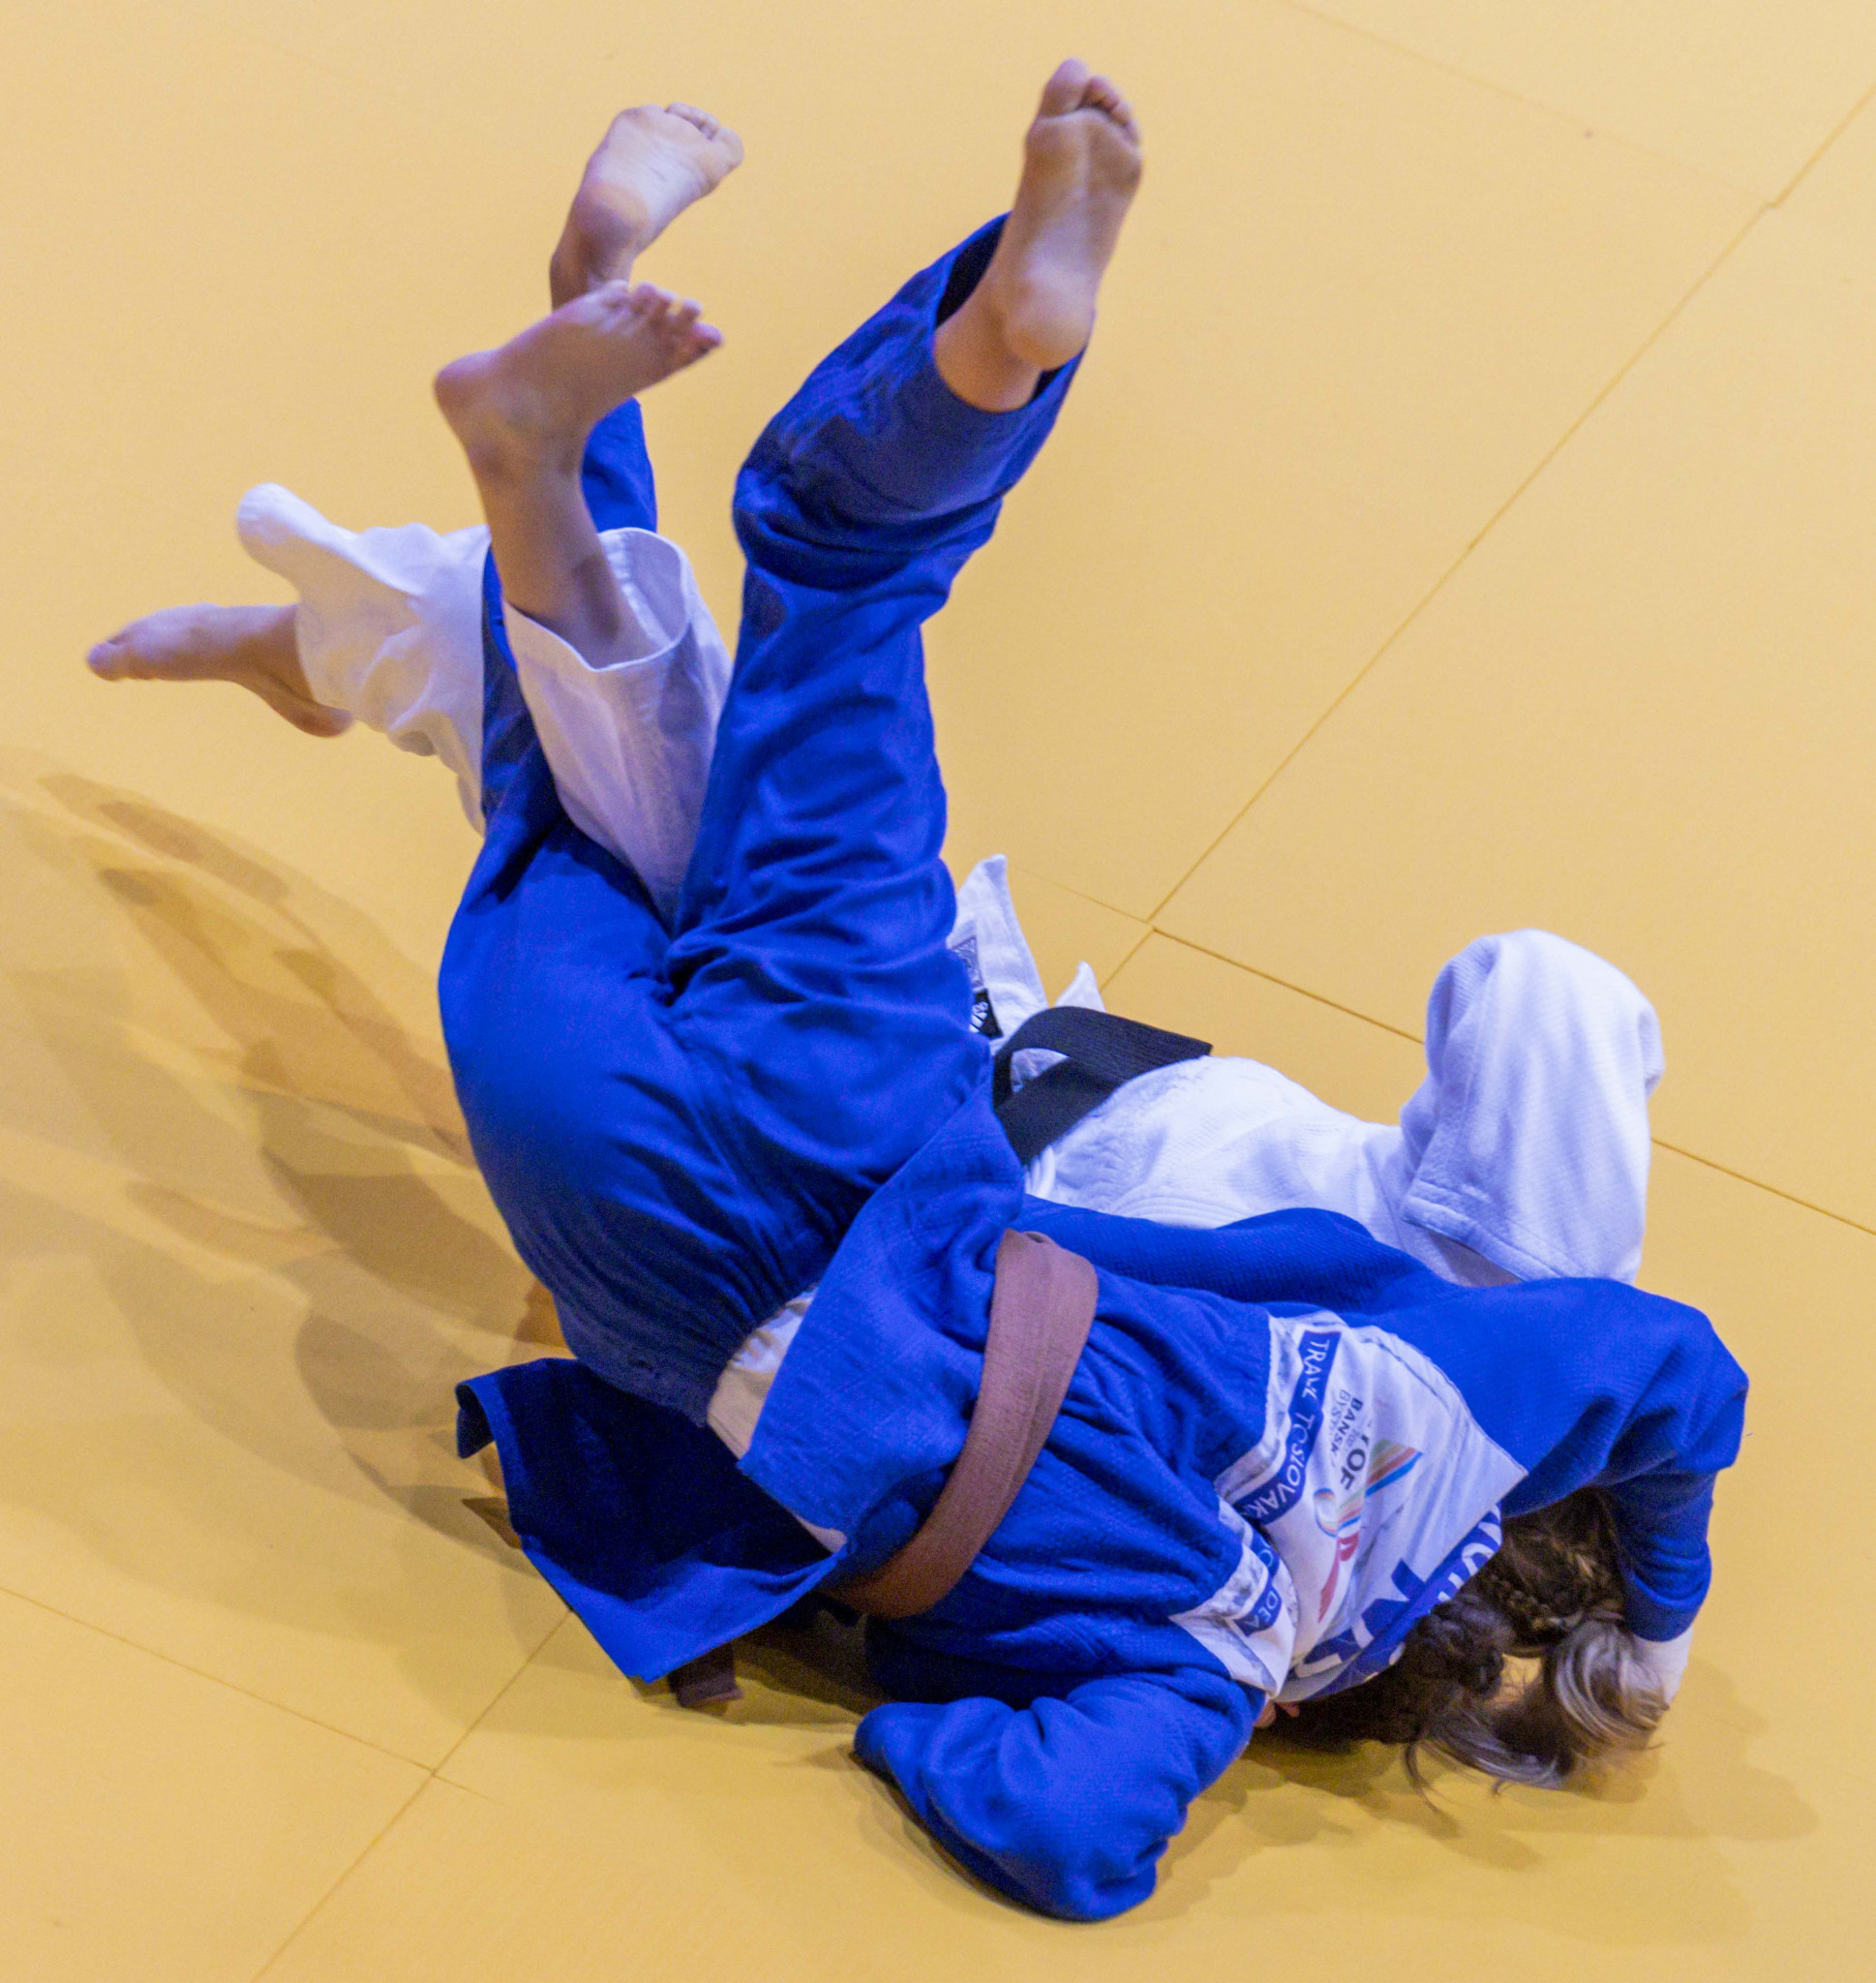 The Netherlands' Vera Wandel, in blue, secured gold in the girls' under-44kg judo final as Hungarian Szabina Szeleczki was disqualified ©EYOF Banská Bystrica 2022